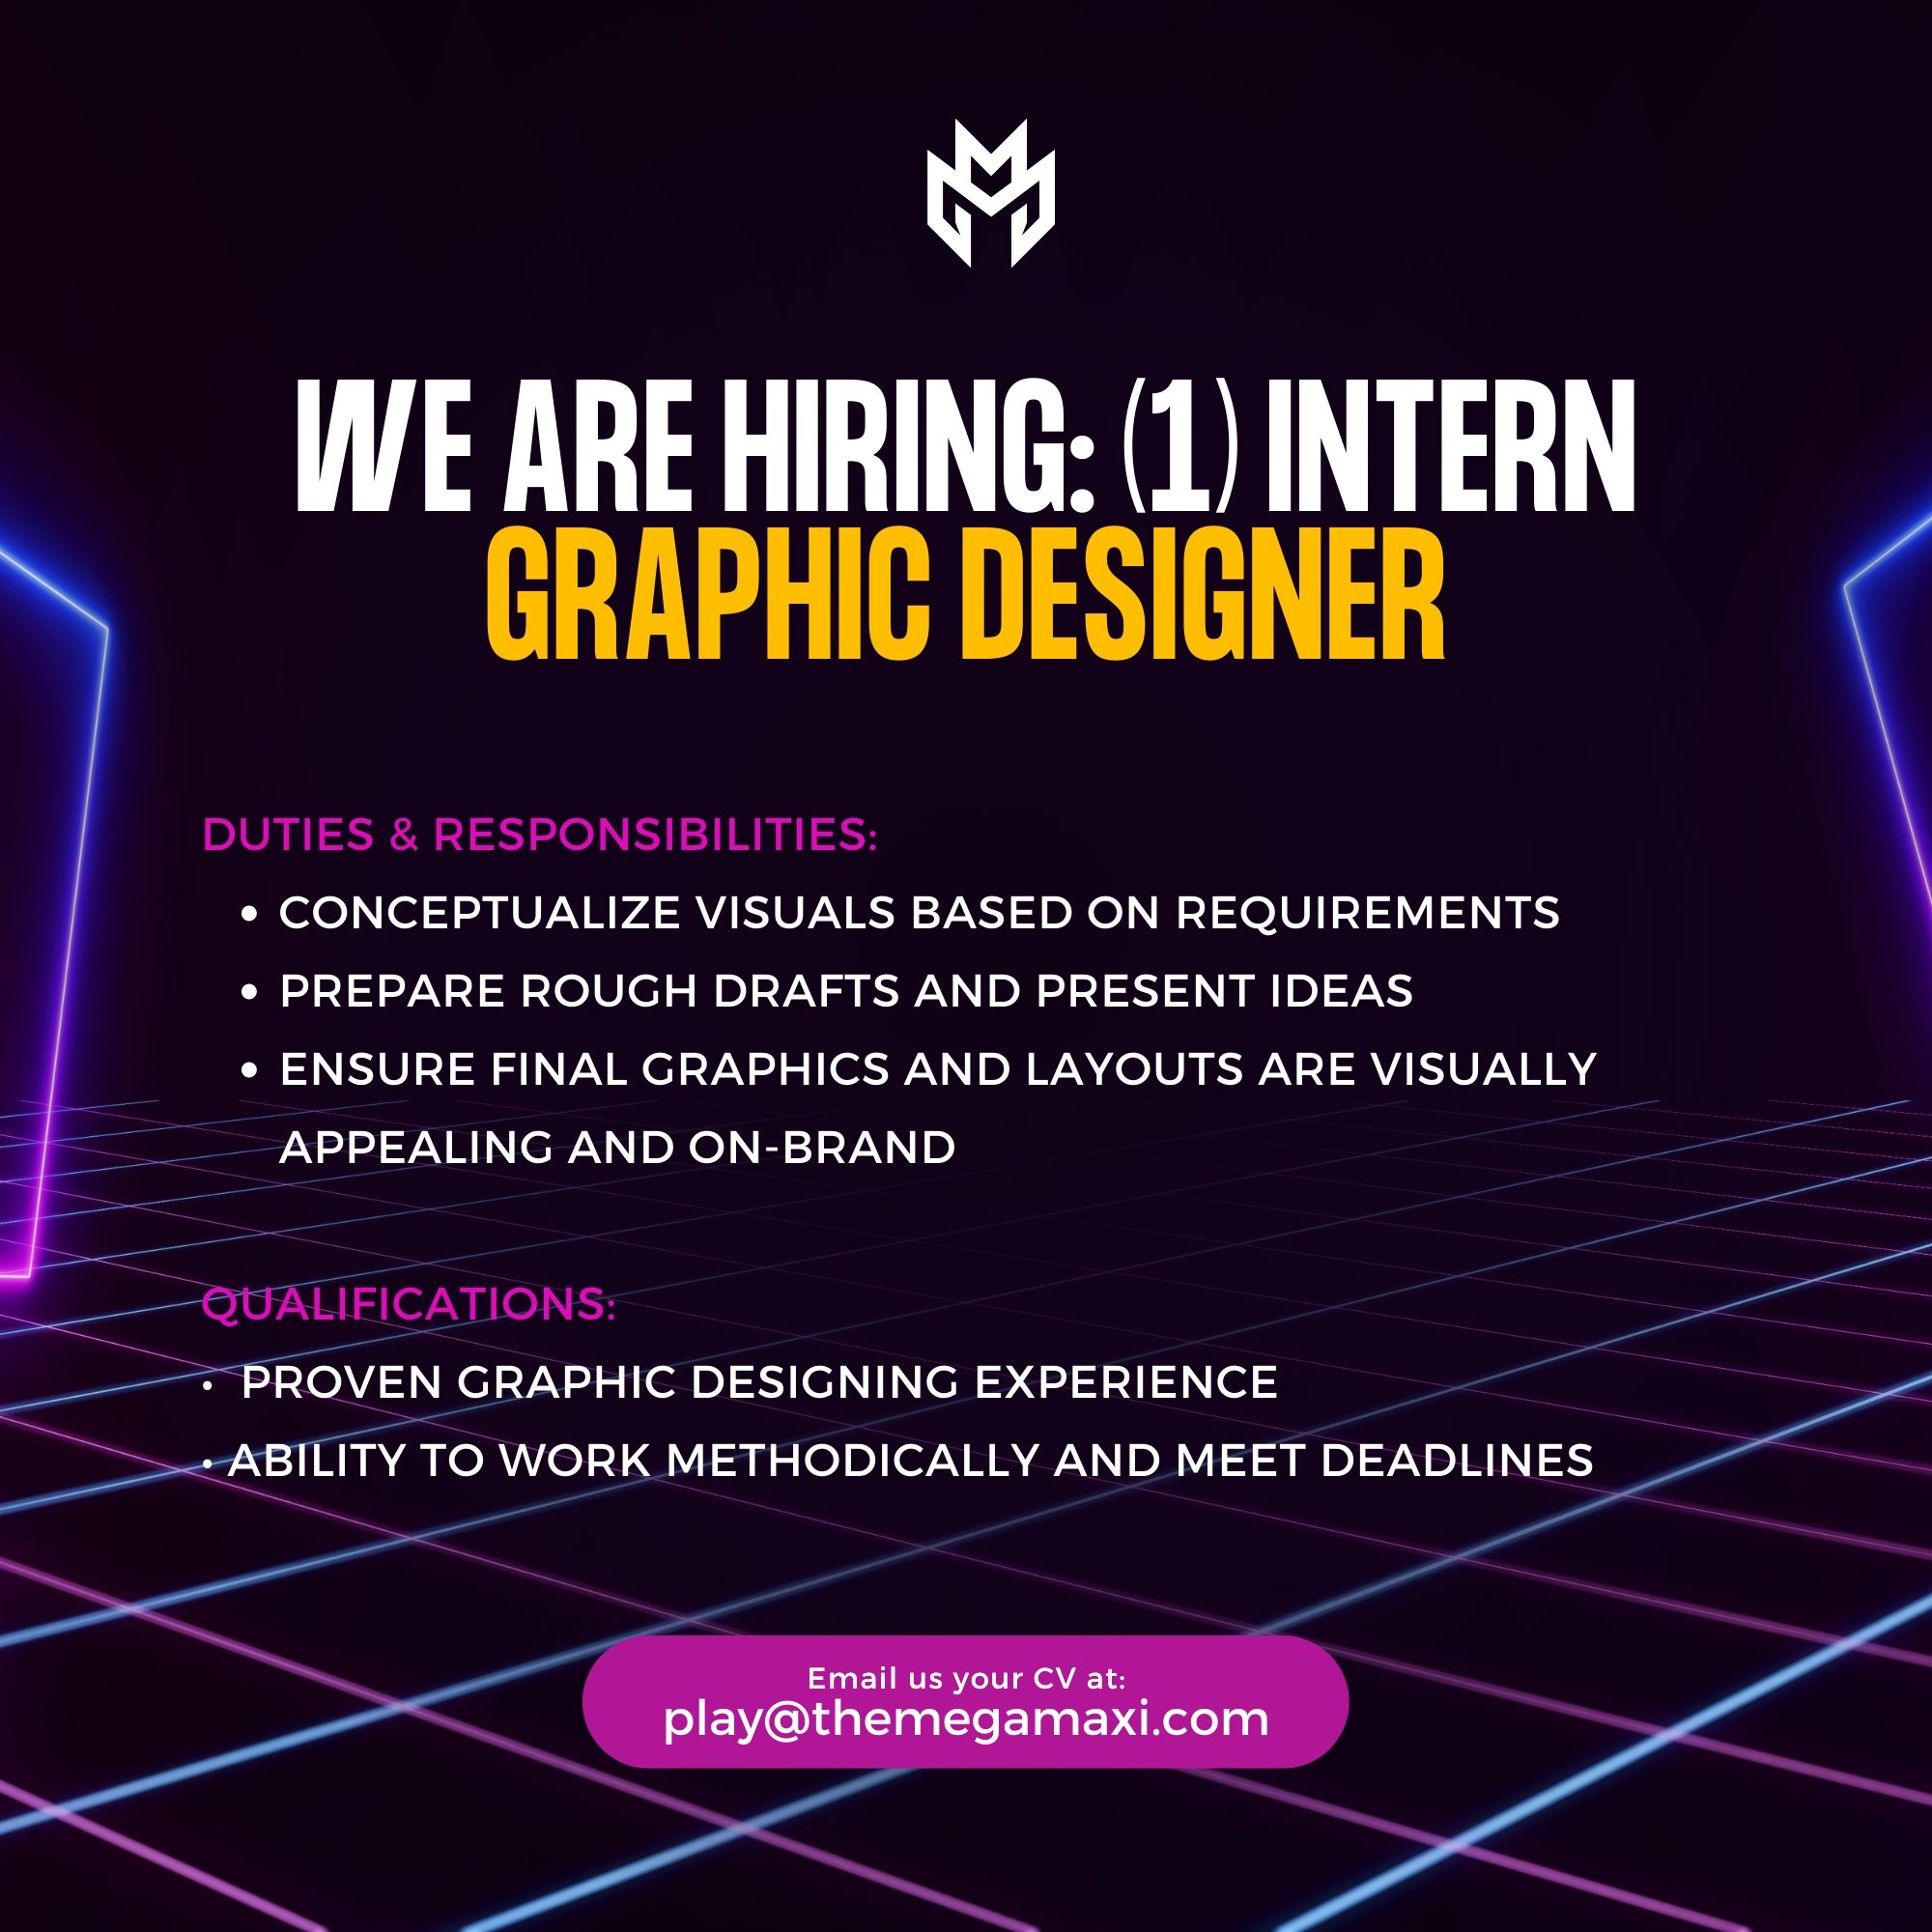 Looking for GFX Artist! Contact on Discord! - Recruitment